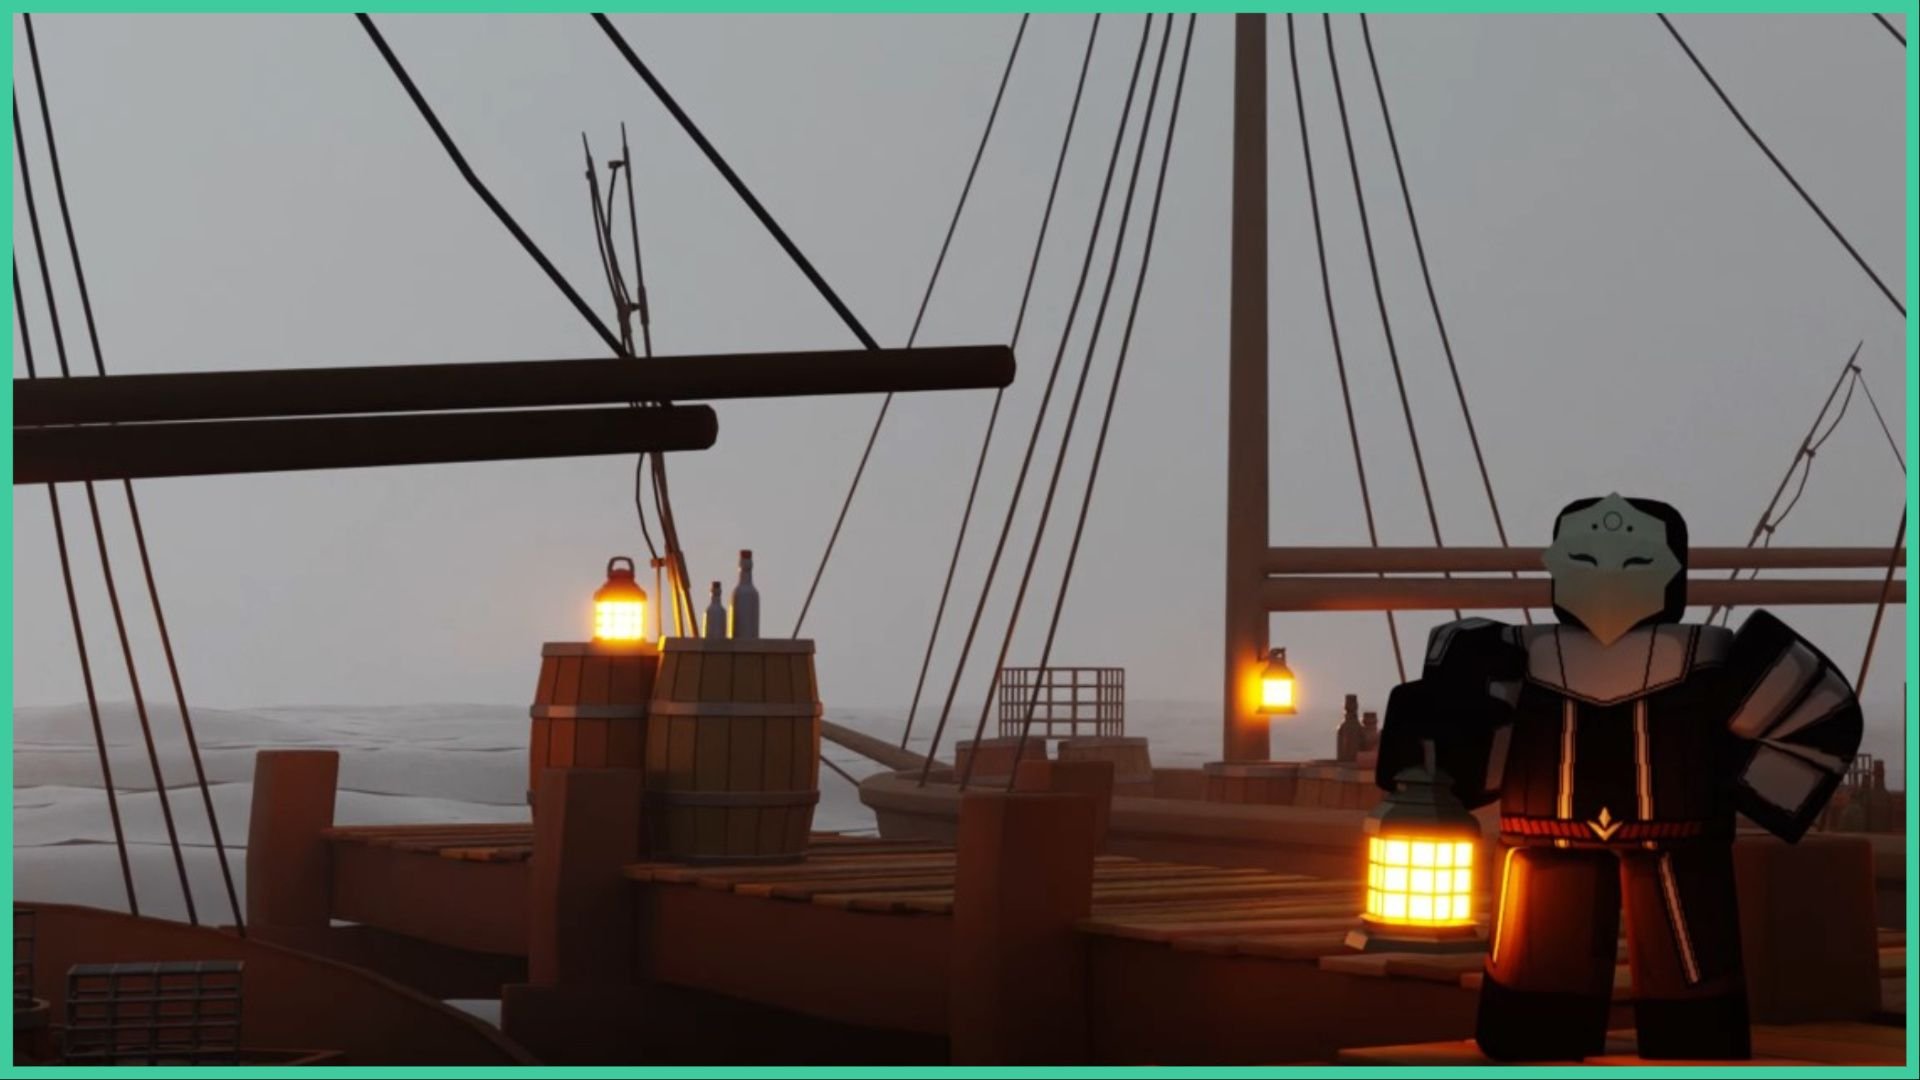 feature image for our deepwoken vibrant gem guide, the image is a screenshot from the game's trailer of a masked individual holding a glowing lantern while standing on a dock, with some boats stationed nearby, there are wooden barrels and small metal cages, as well as a couple of lanterns lighting up the docks, as grey mist fills the sky over the water